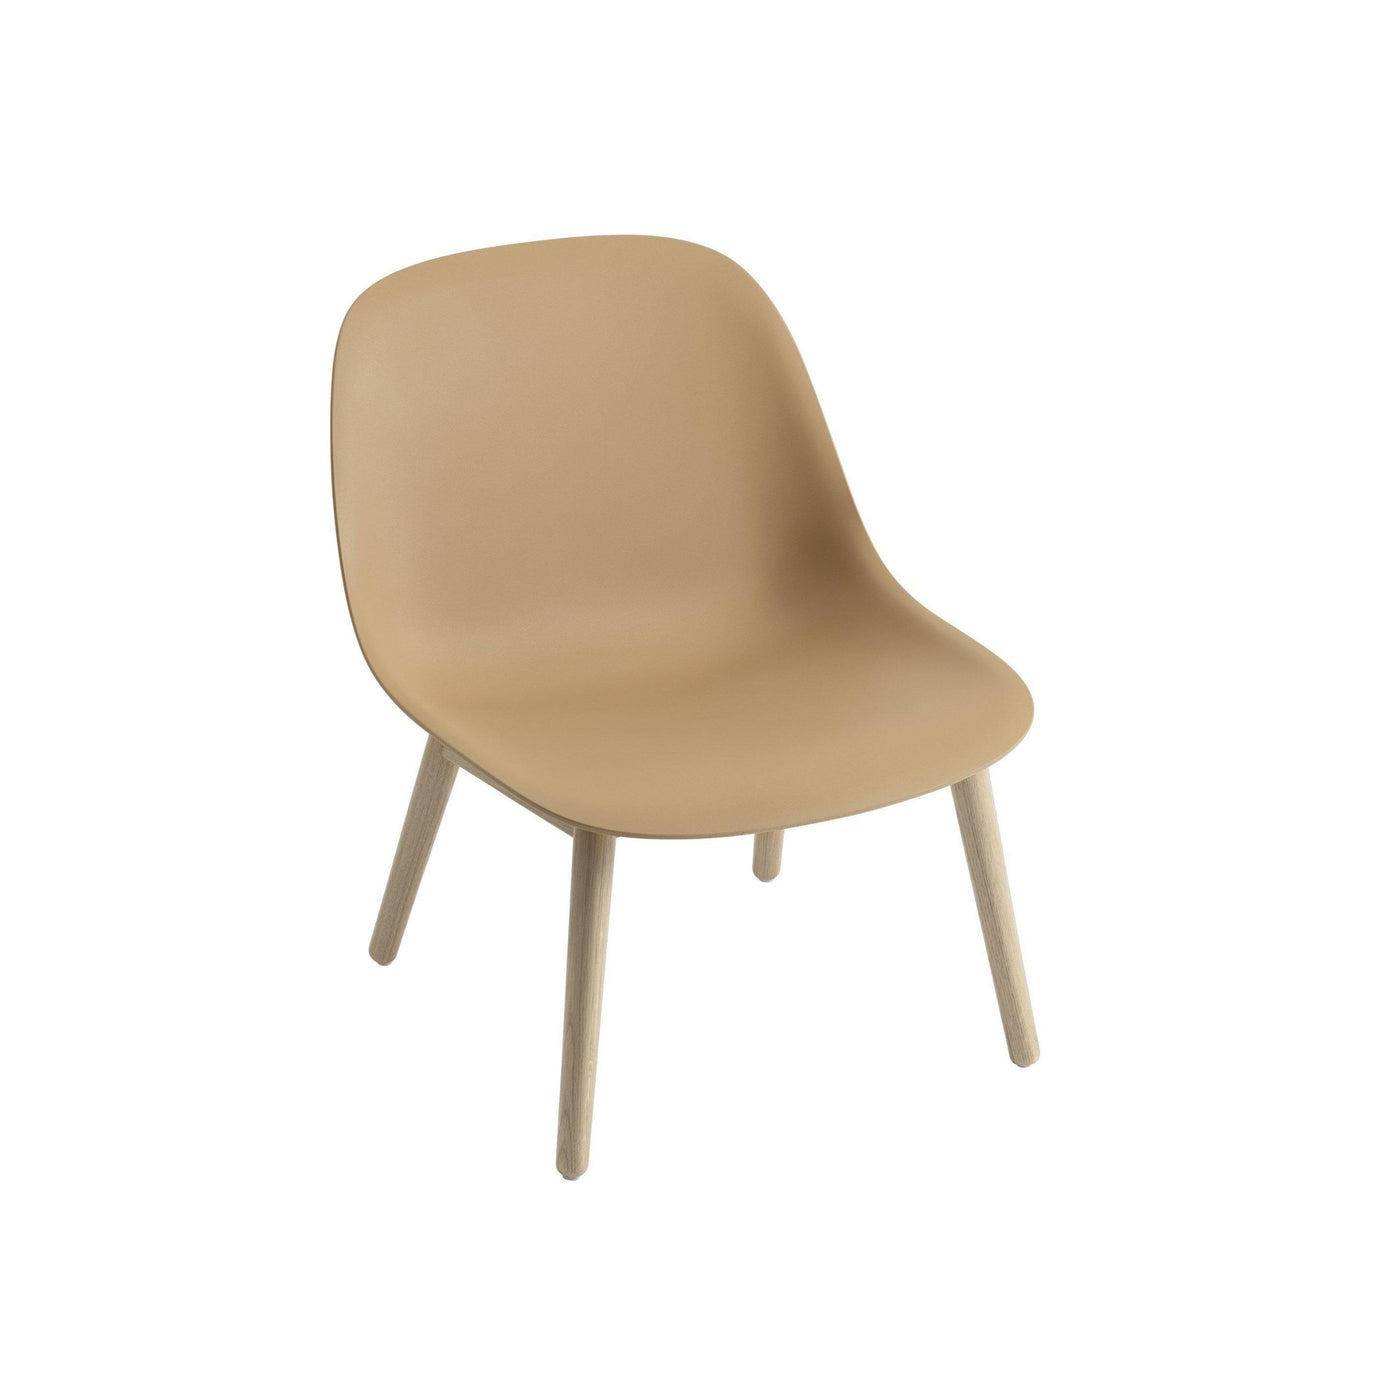 muuto fiber lounge chair with ochre seat and oak base available from someday designs. #colour_ochre